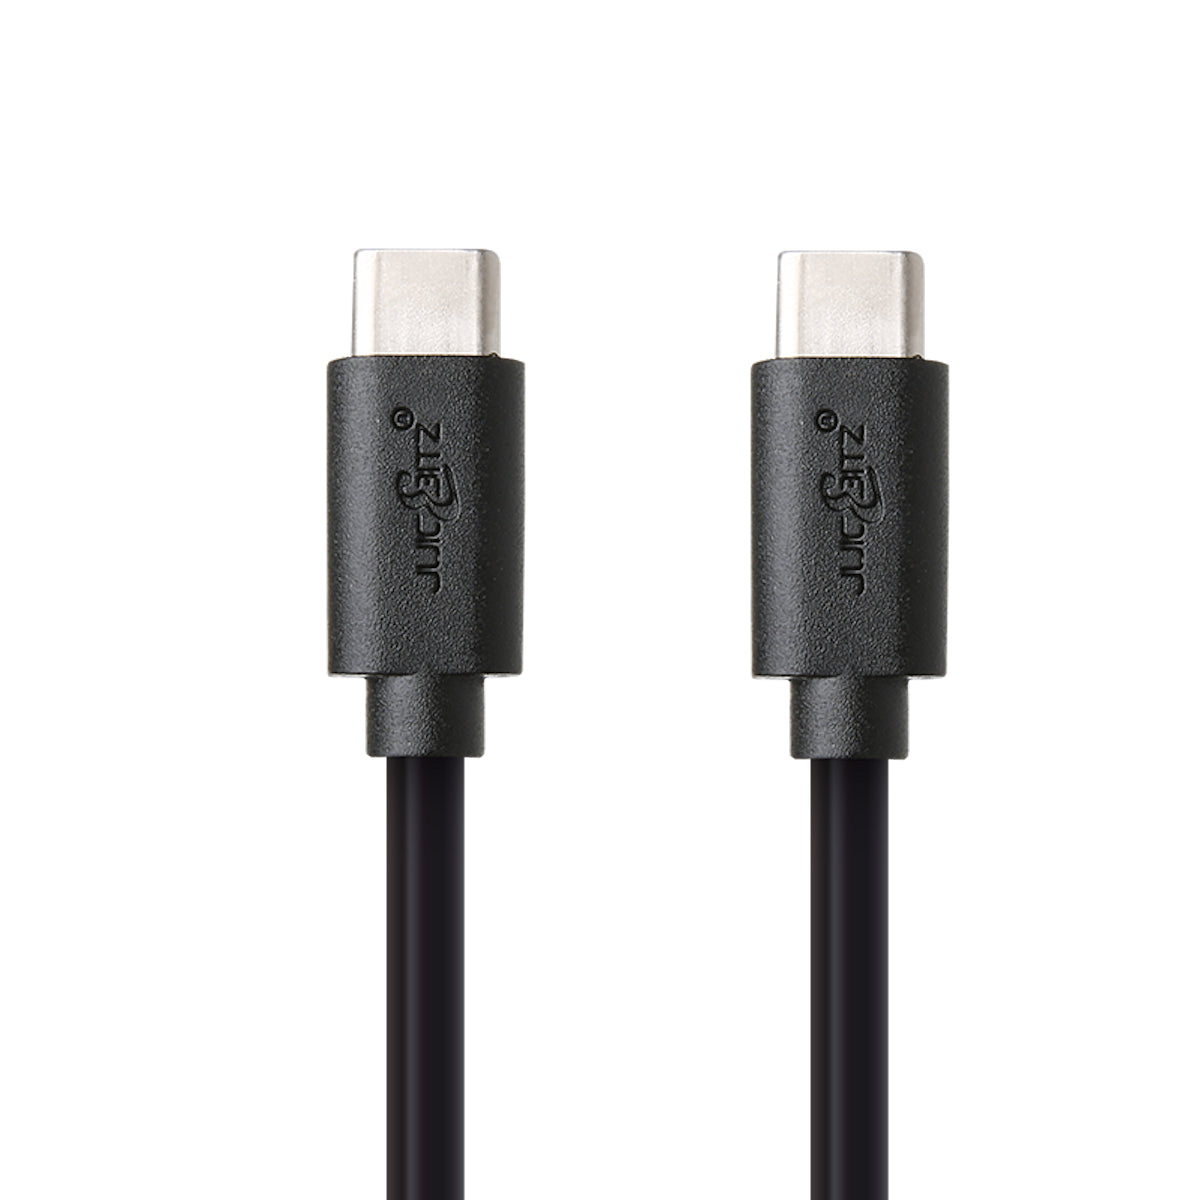 USB-C to USB-C 3A Charger Cable USB 2.0 Data Transfer Lead - Black